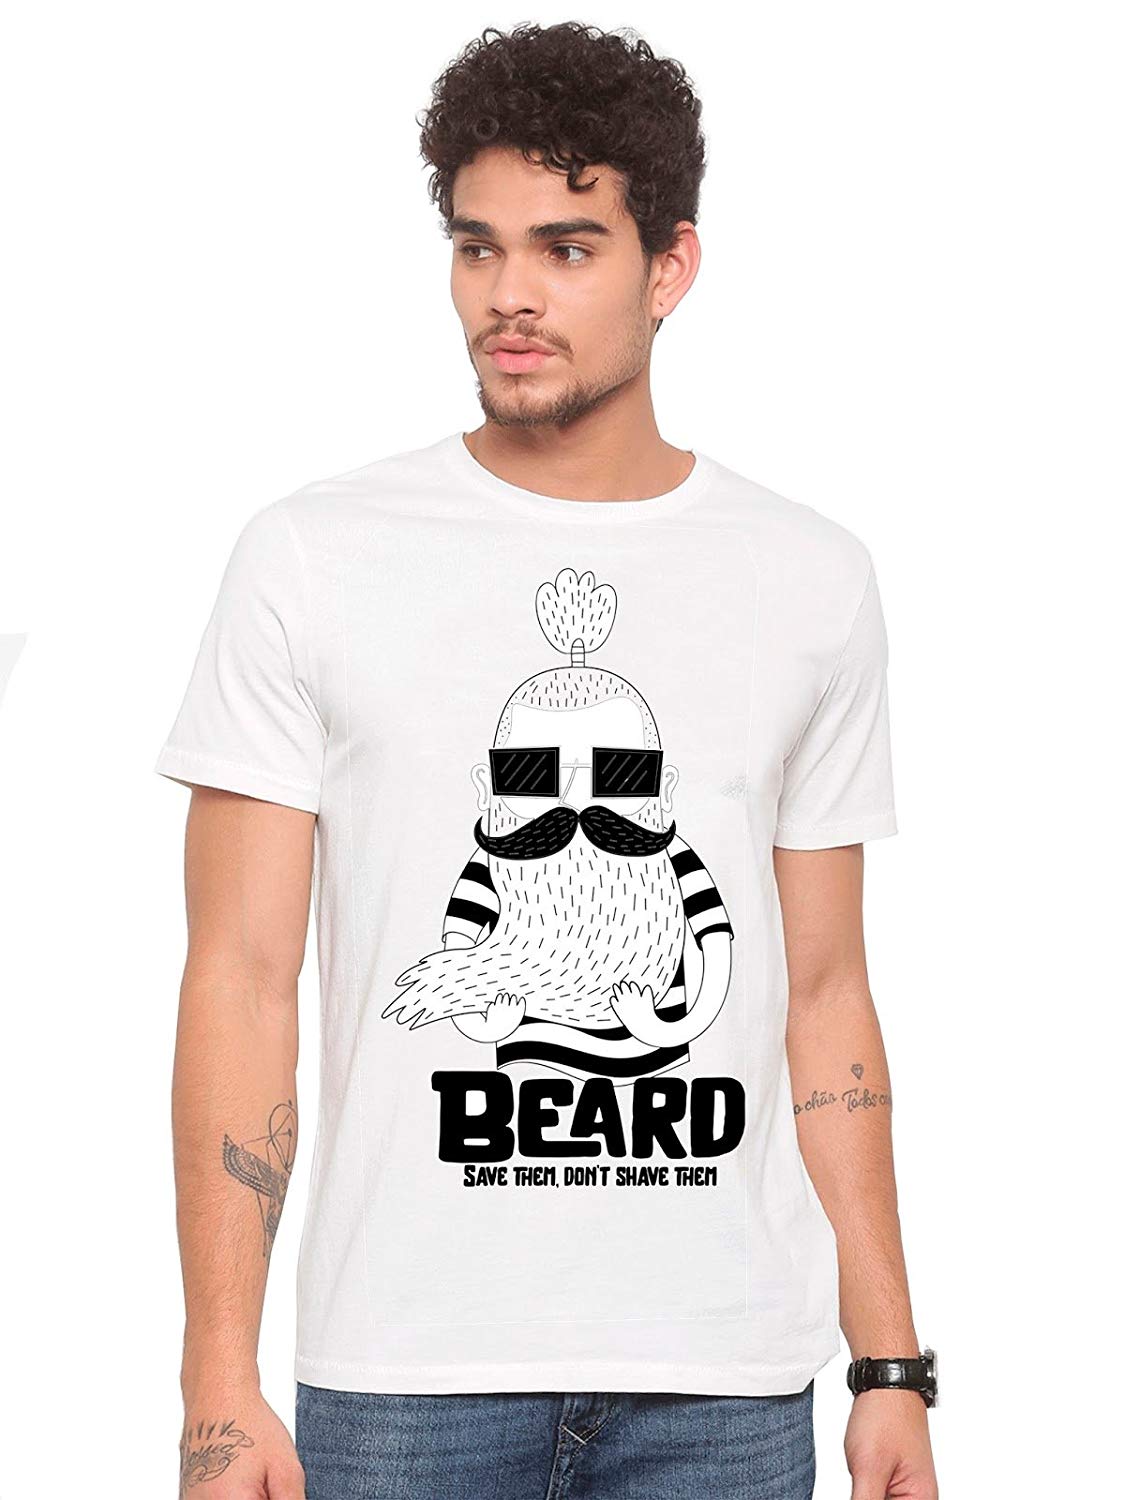 DOUBLE F ROUND NECK HALF SLEEVE WHITE COLOR BEARD SAVE THEM DON'T SHAVE THEM PRINTED T-SHIRT FOR MEN